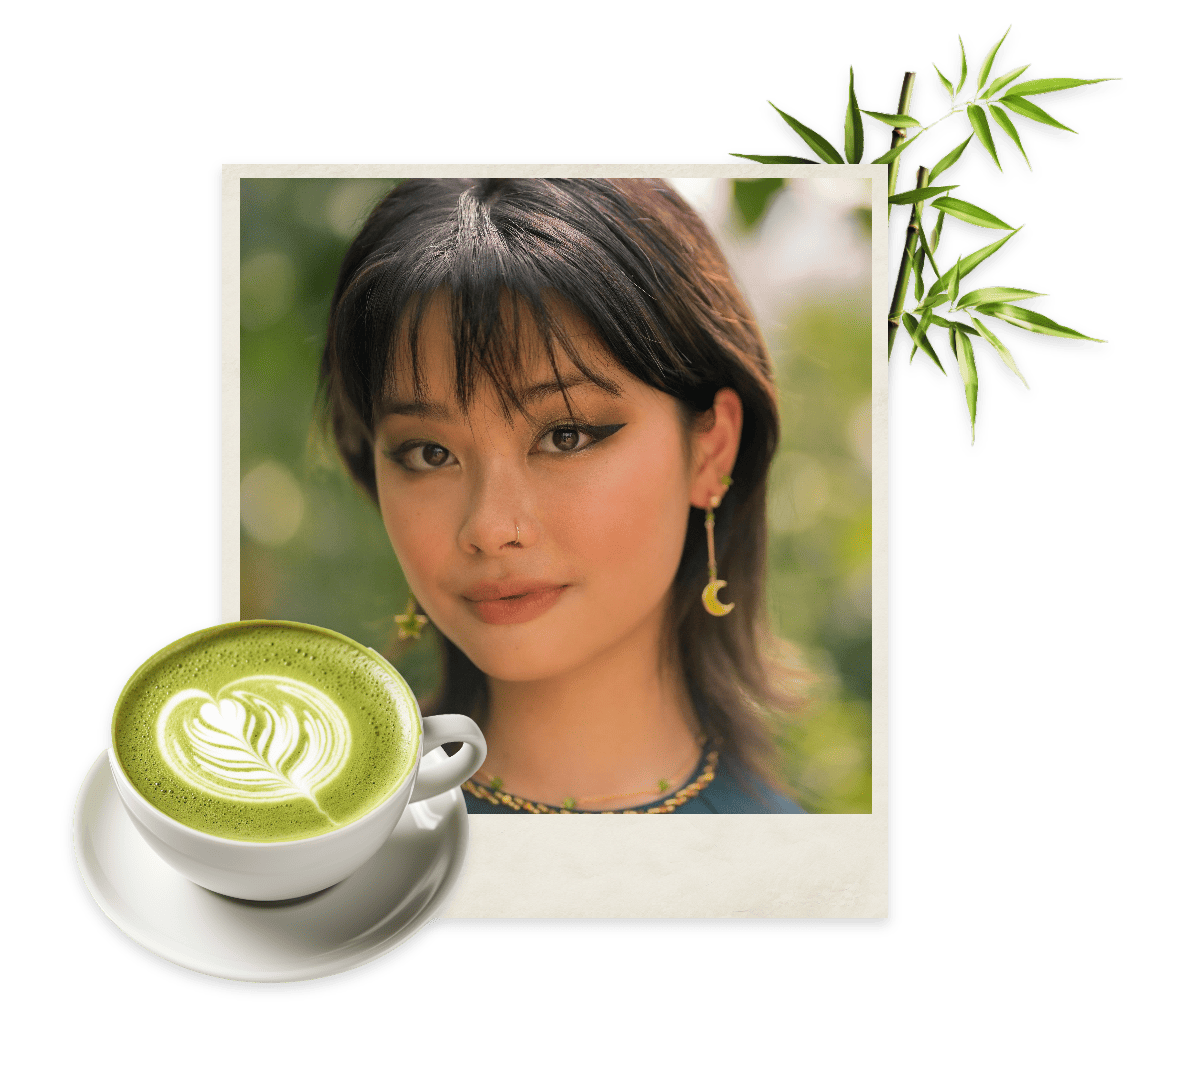 A collage featuring a young woman with dark hair and a subtle smile and a cup of matcha latte with artful foam on the side, set against a leafy green background.